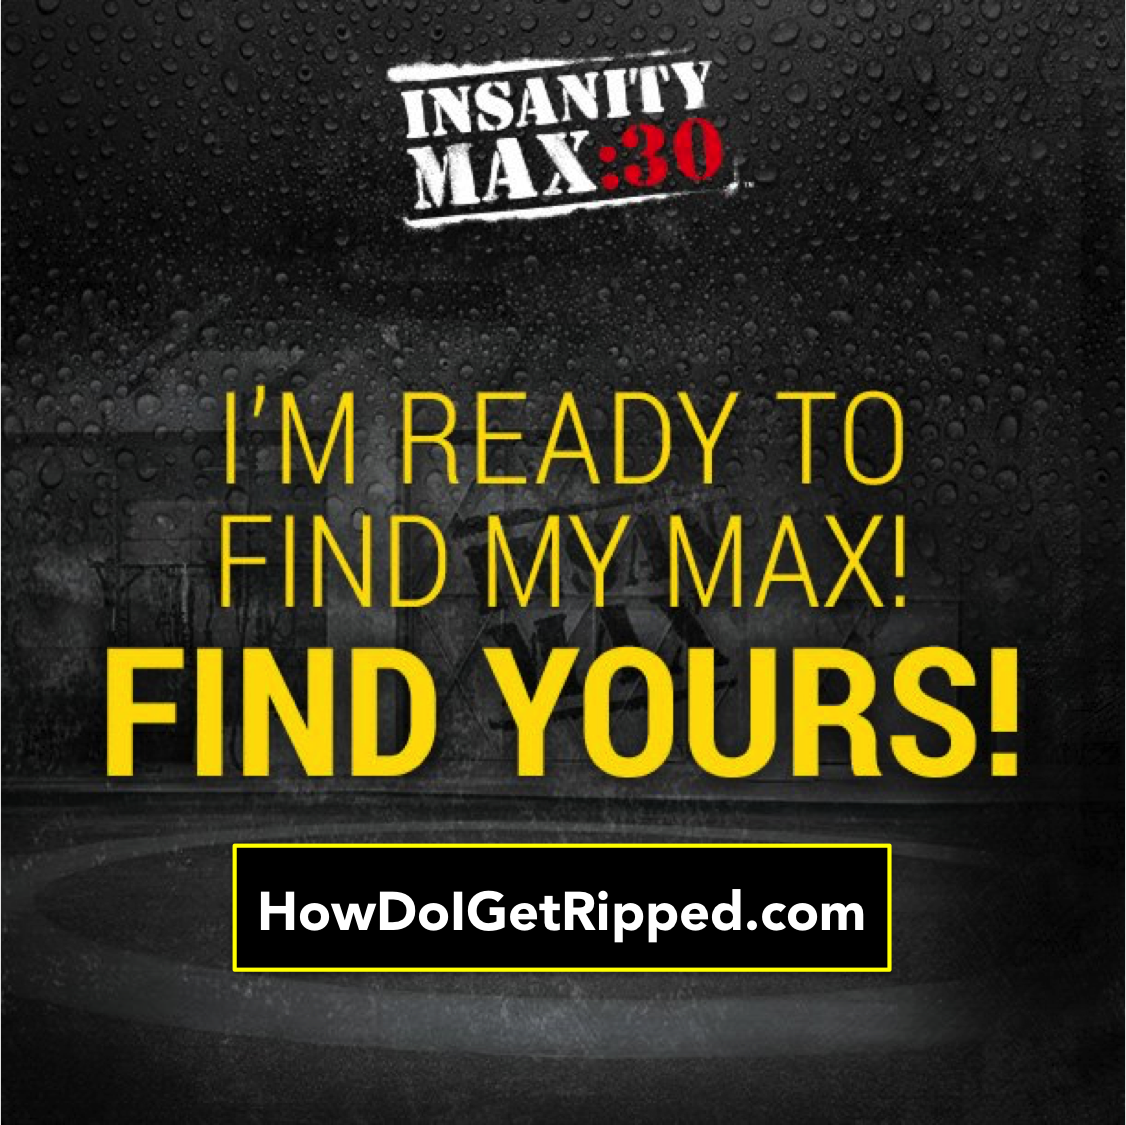 Find Your Max Insanity Max:30